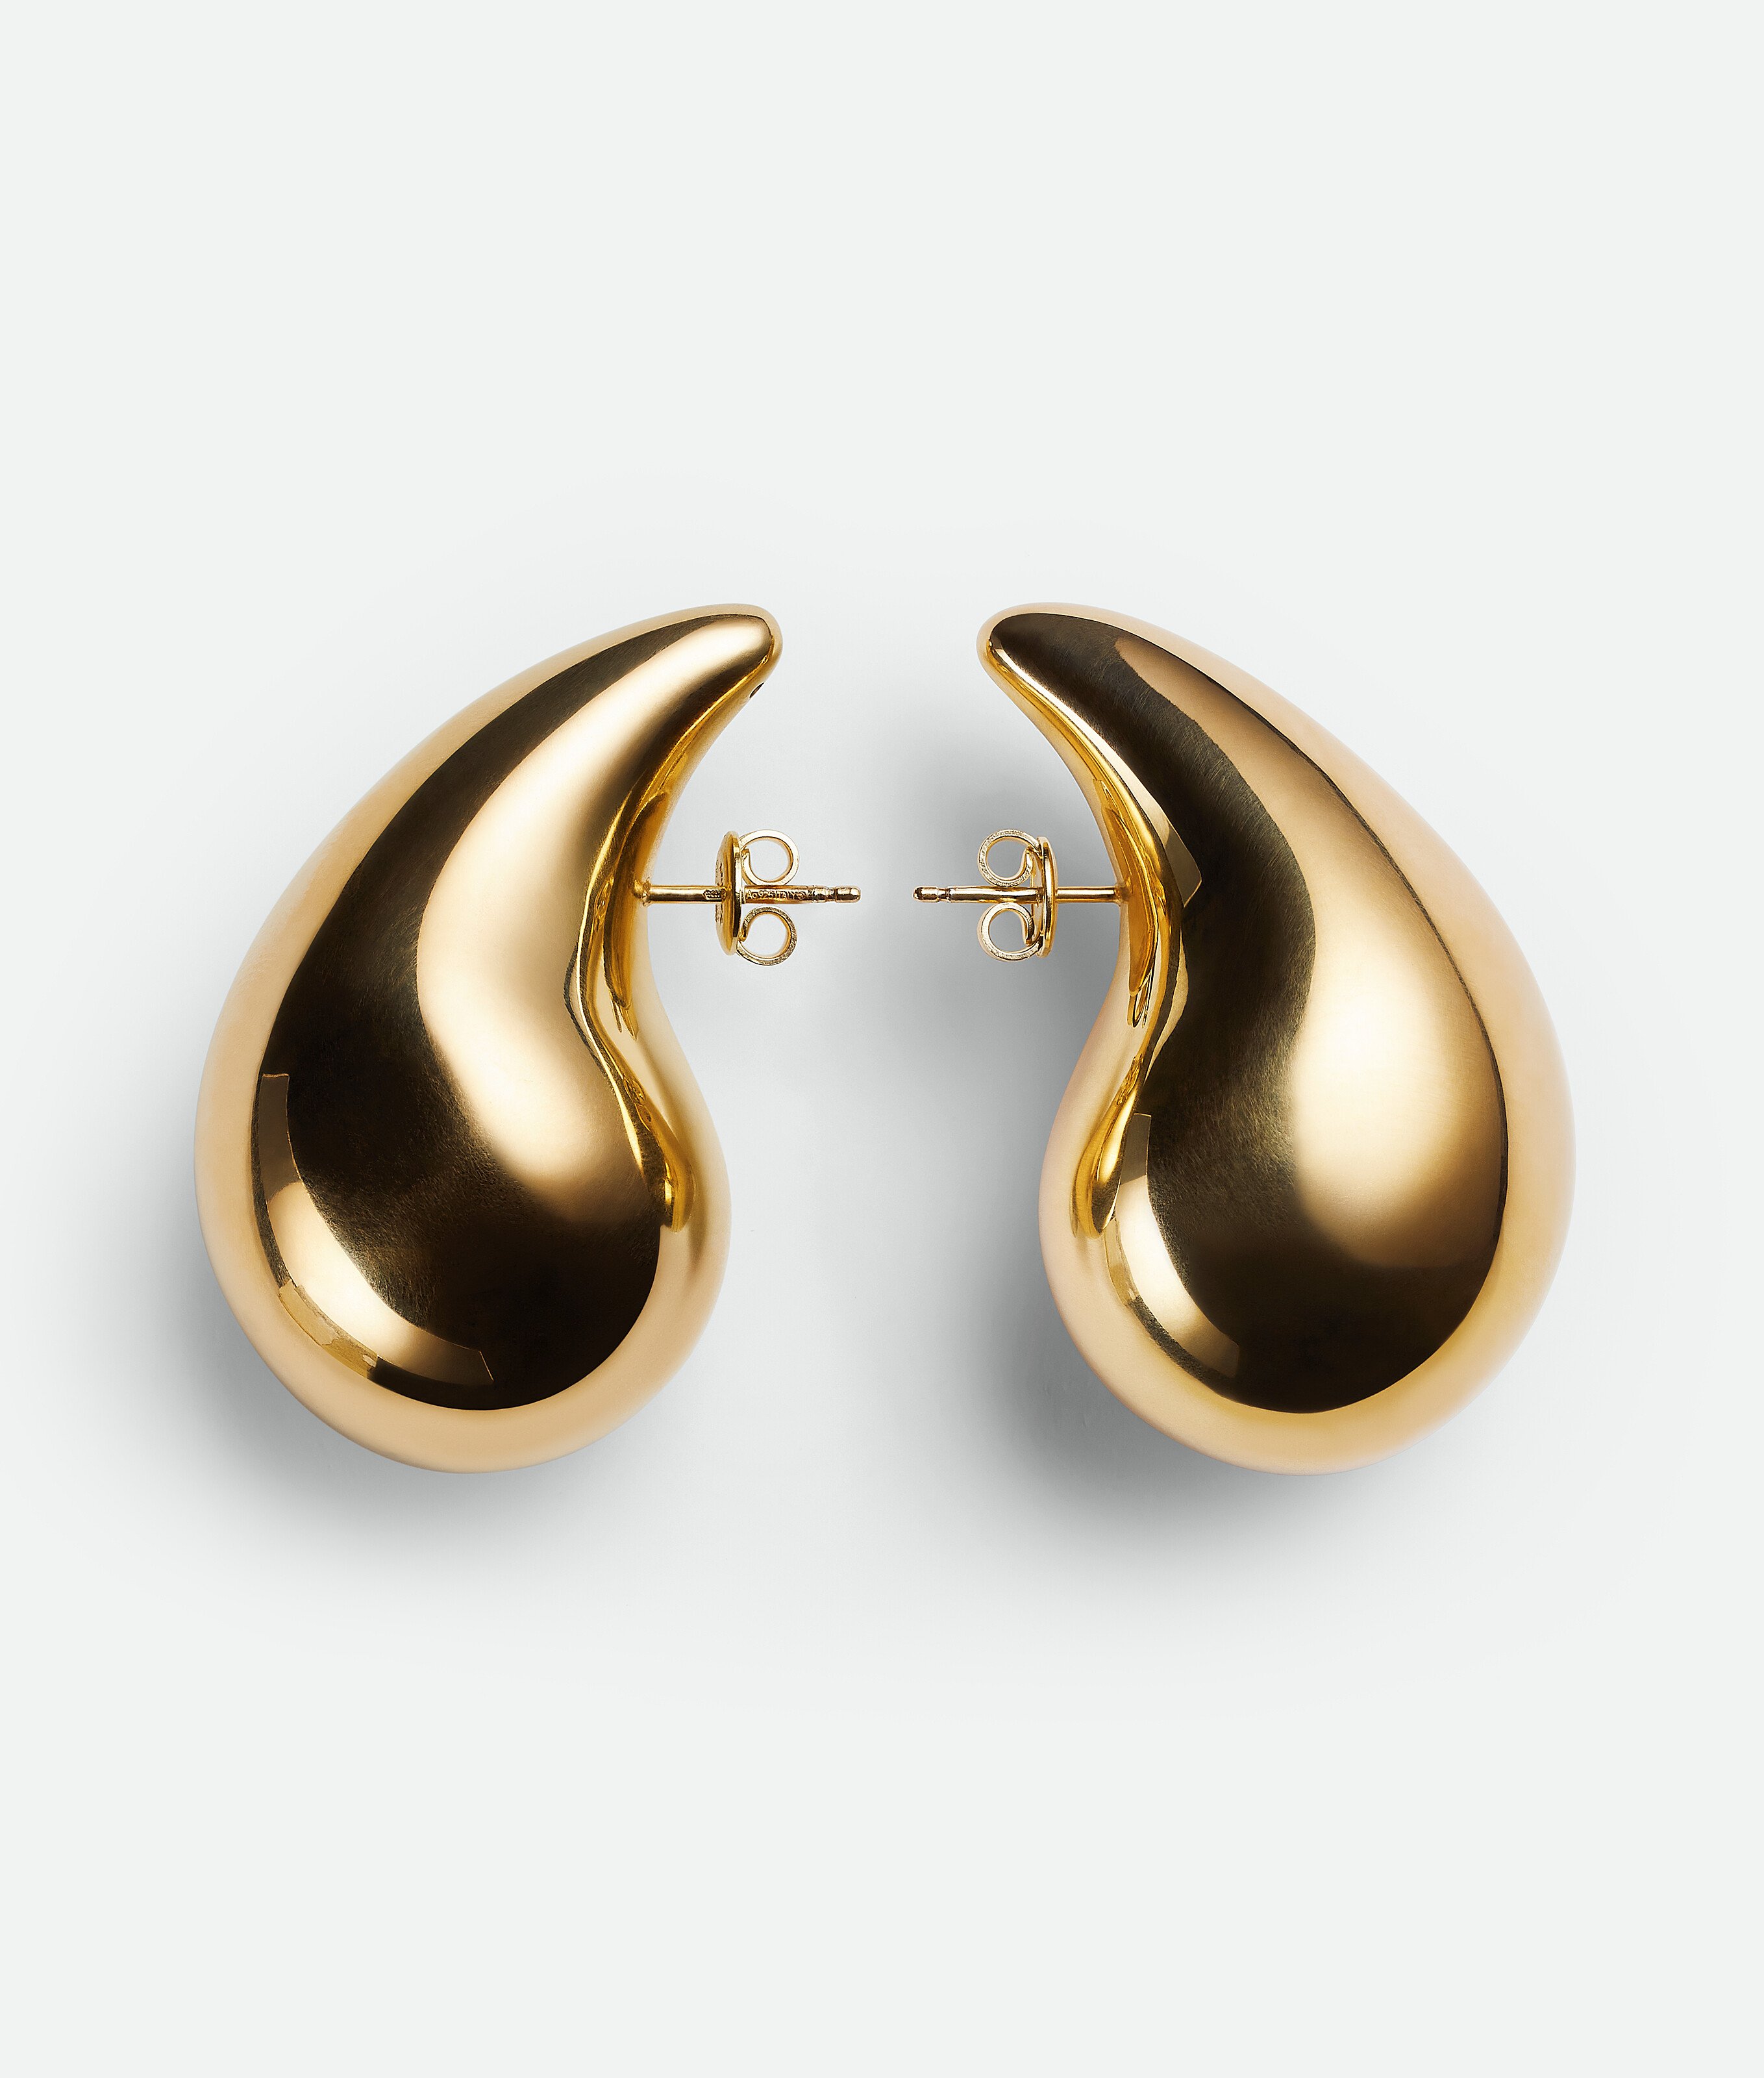 Big '80s Earrings Are Back—26 Pairs to Shop the Trend | Who What Wear